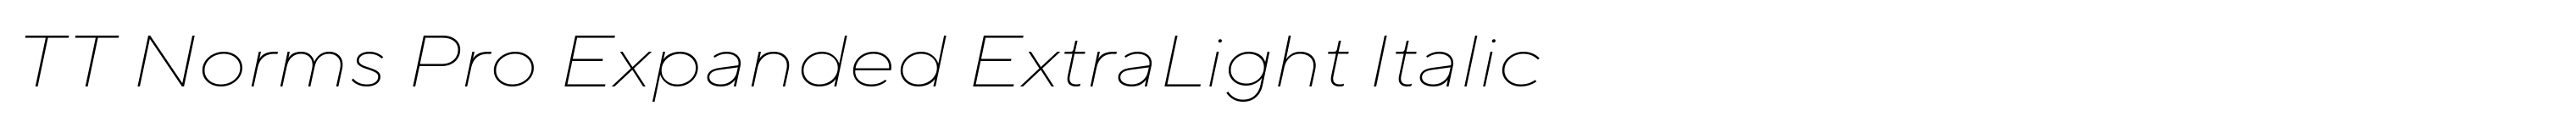 TT Norms Pro Expanded ExtraLight Italic